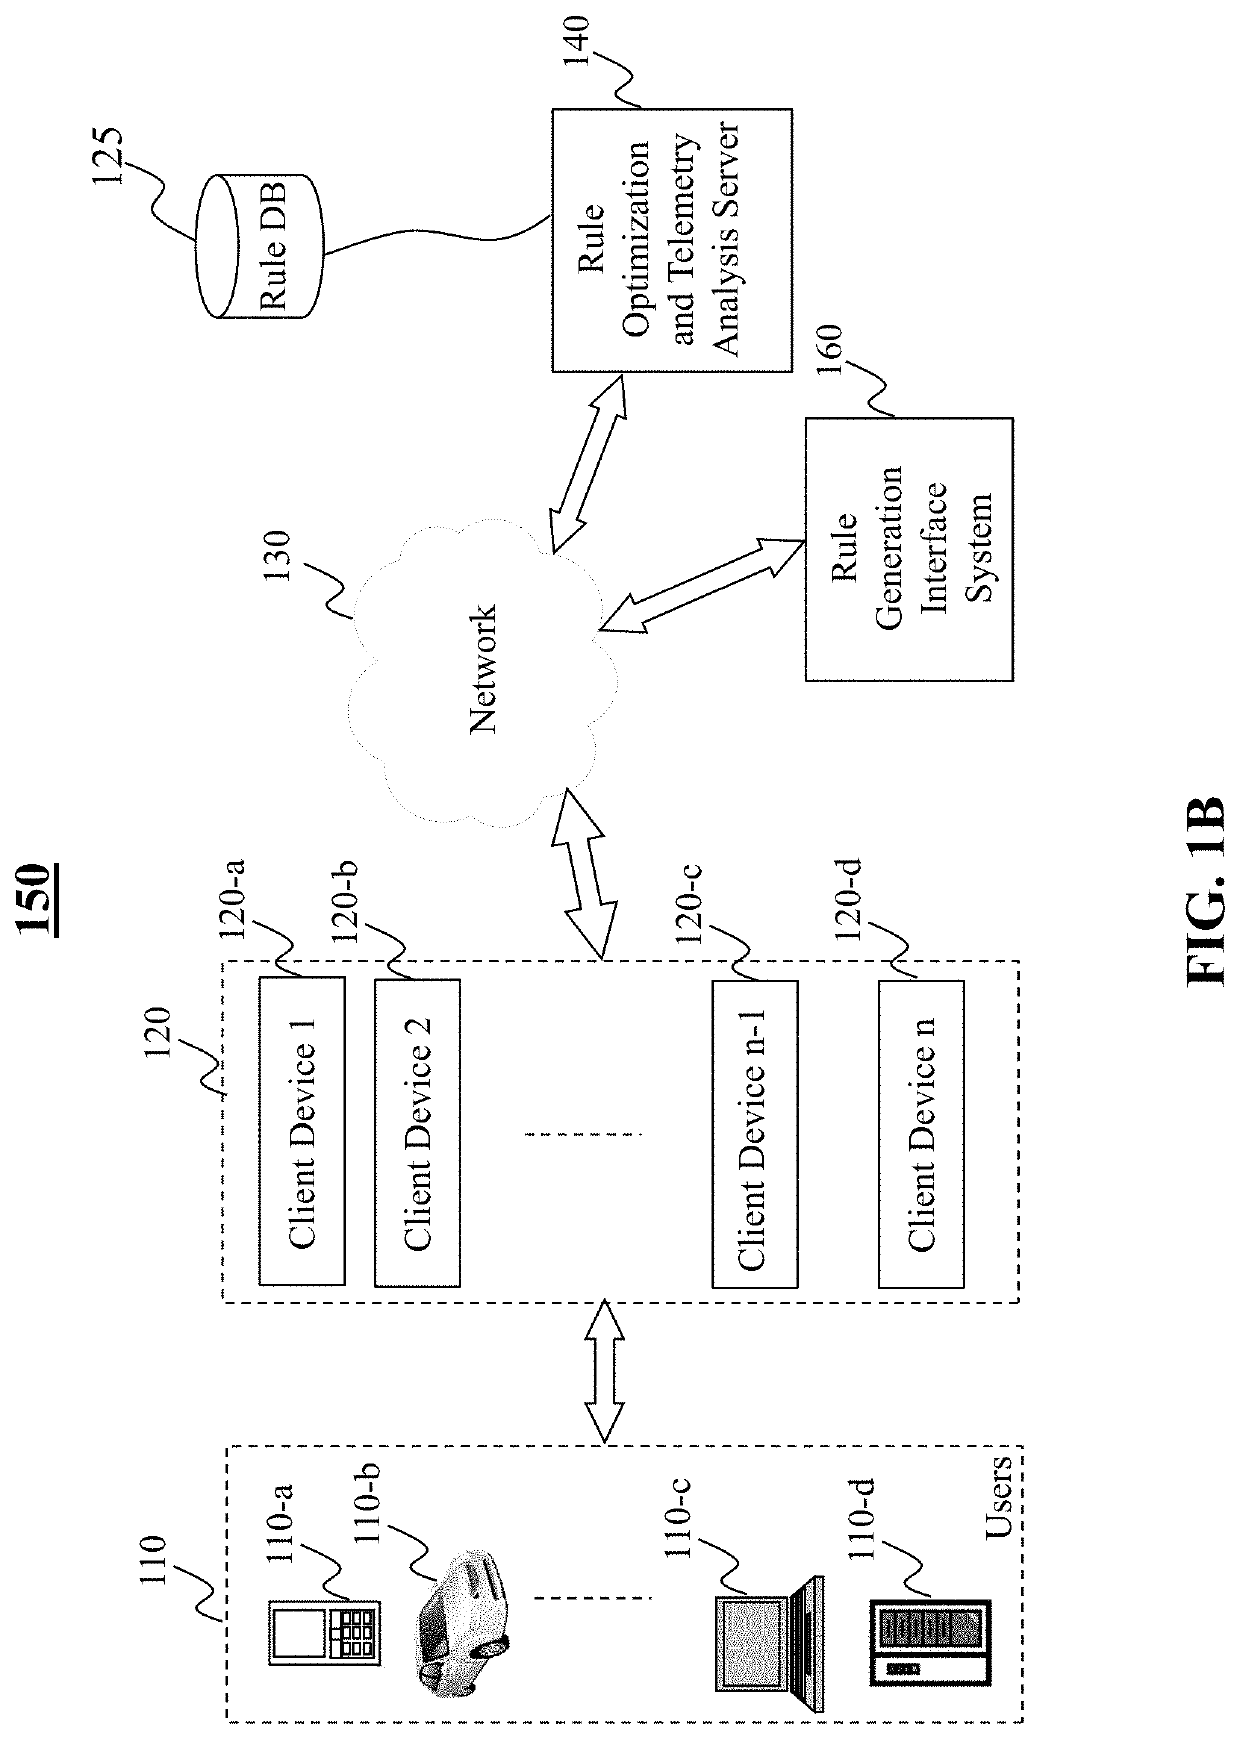 Method and system for intrusion detection and prevention